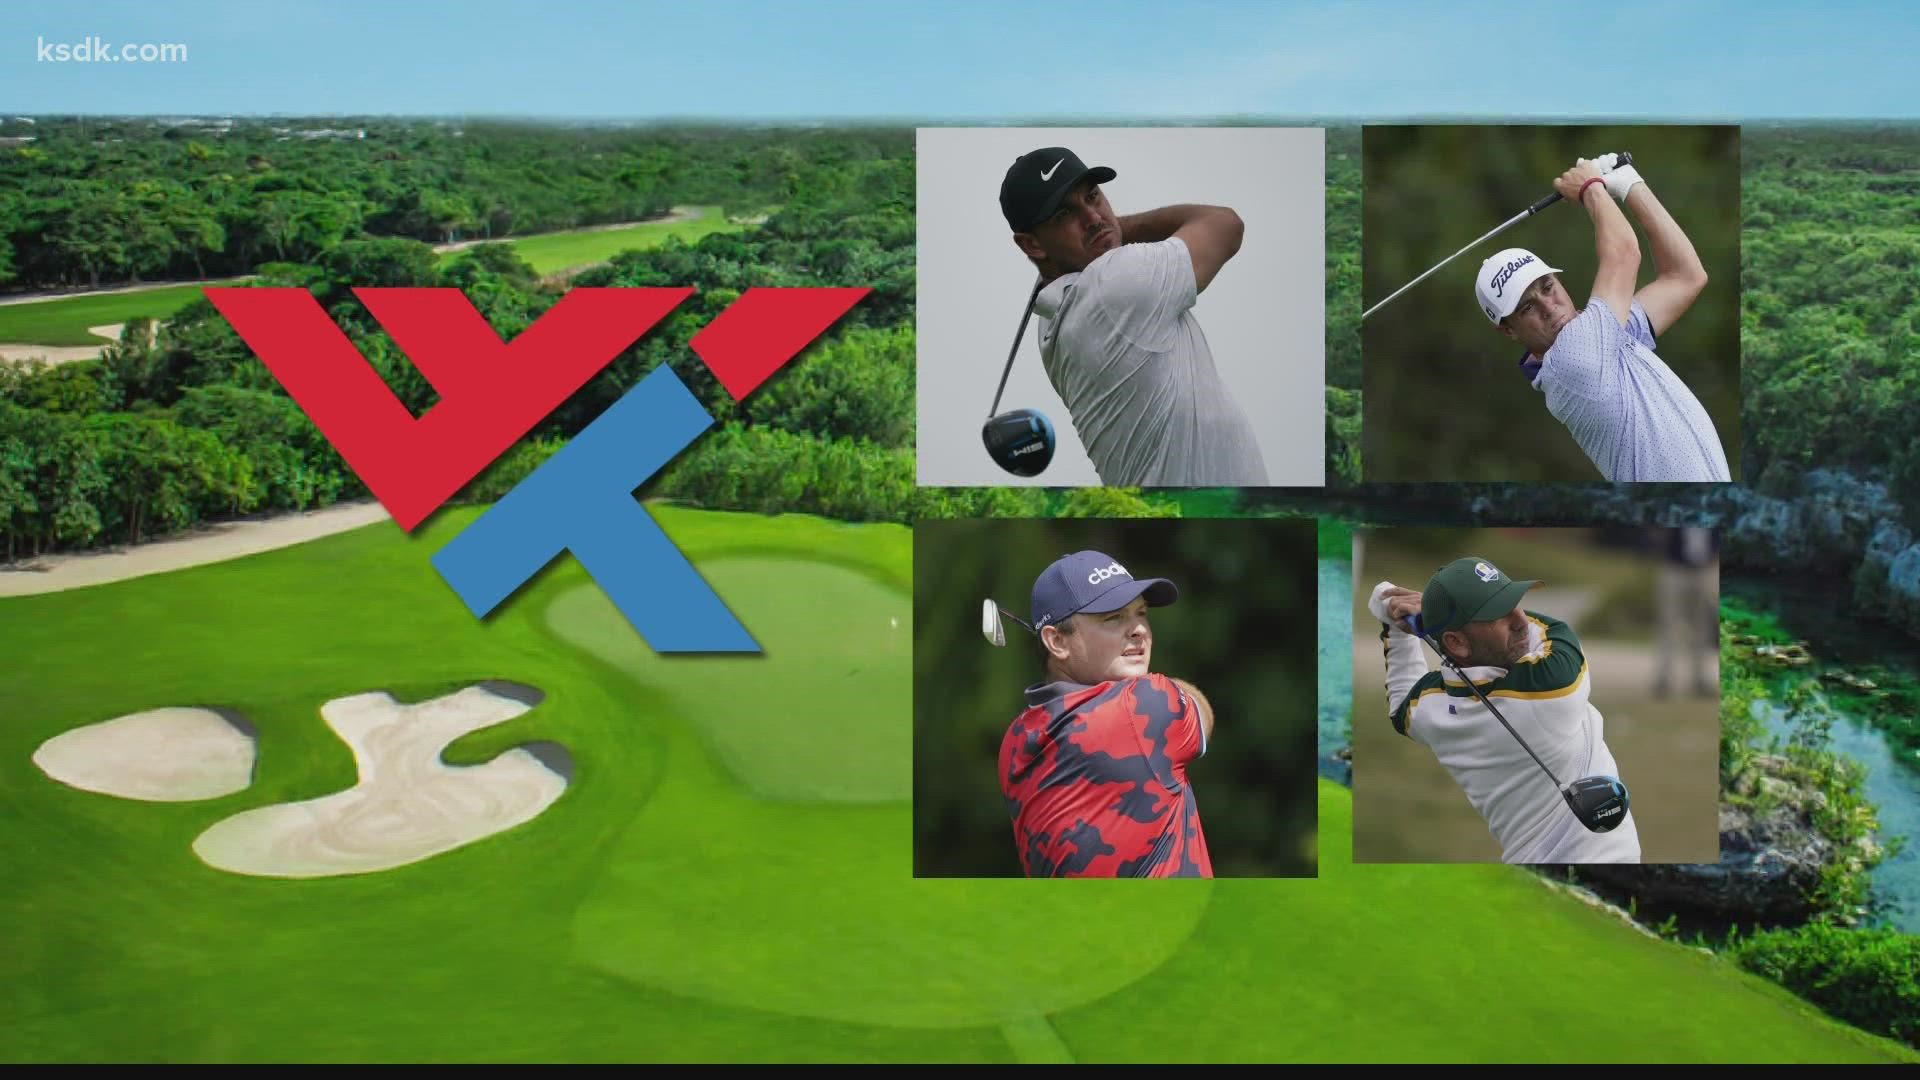 WWT is bringing together some of the greatest golfers in the world for the championship at Mayakoba